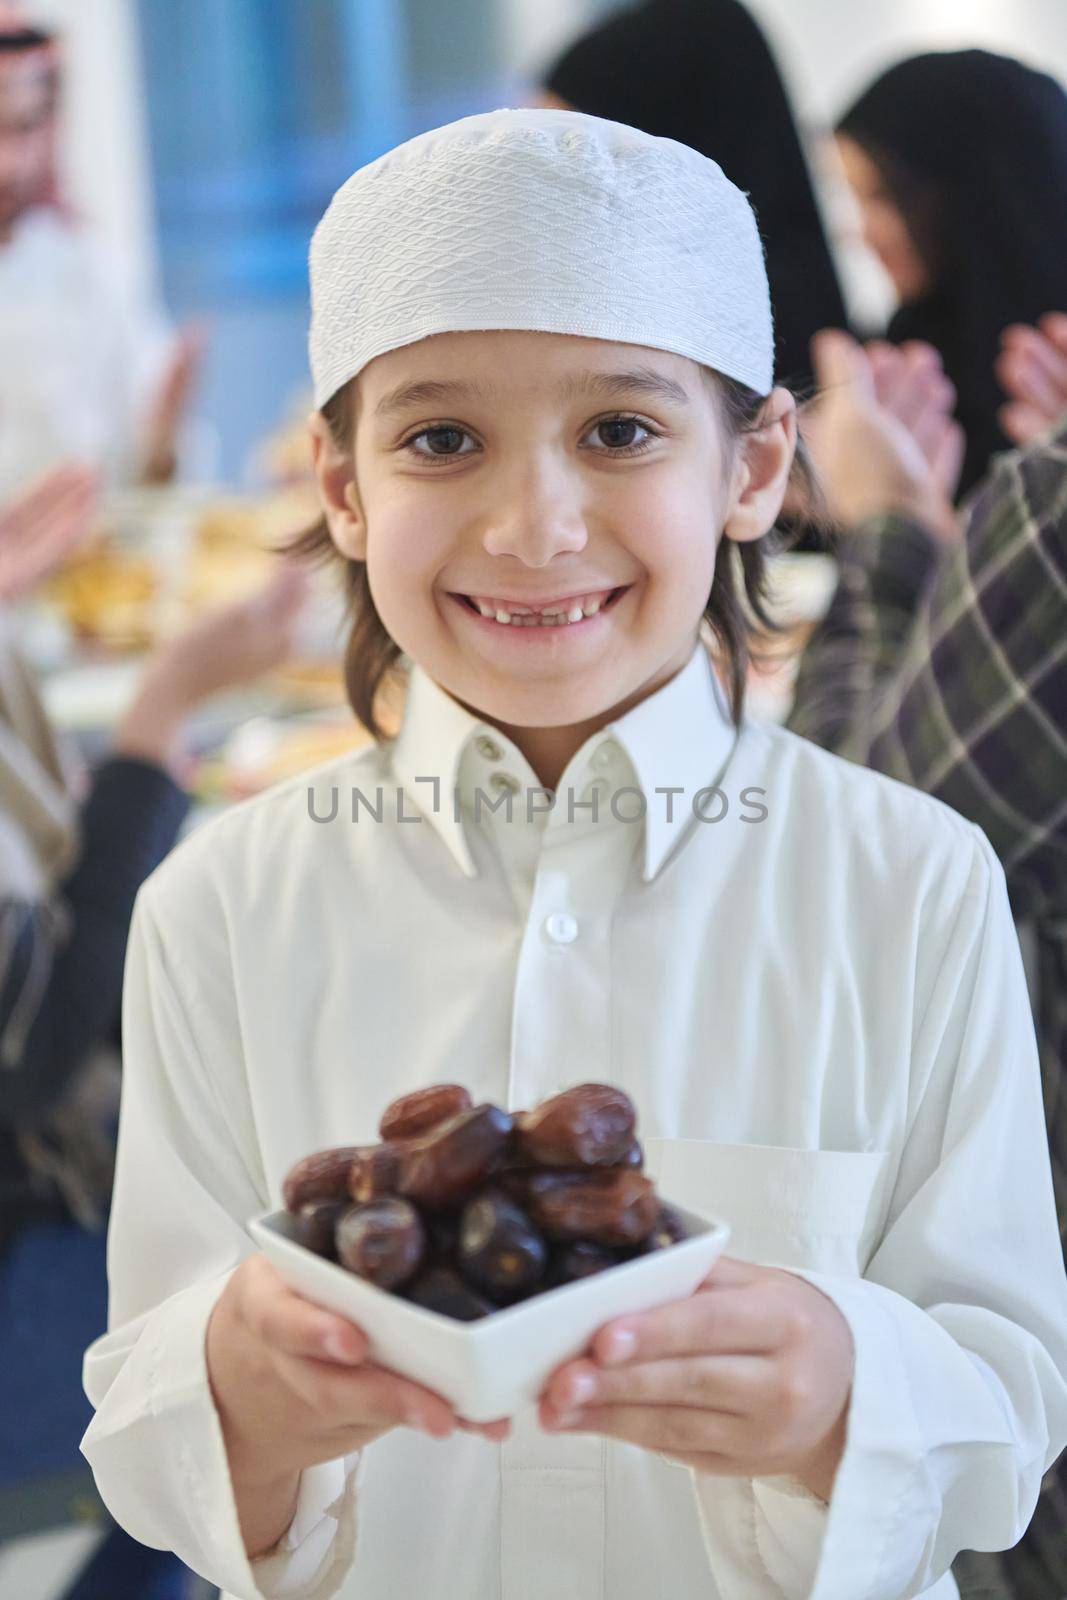 Arabian kid in the traditional clothes during iftar. Portrait of happy young muslim boy holding bowl of dates while rest of the family are eating